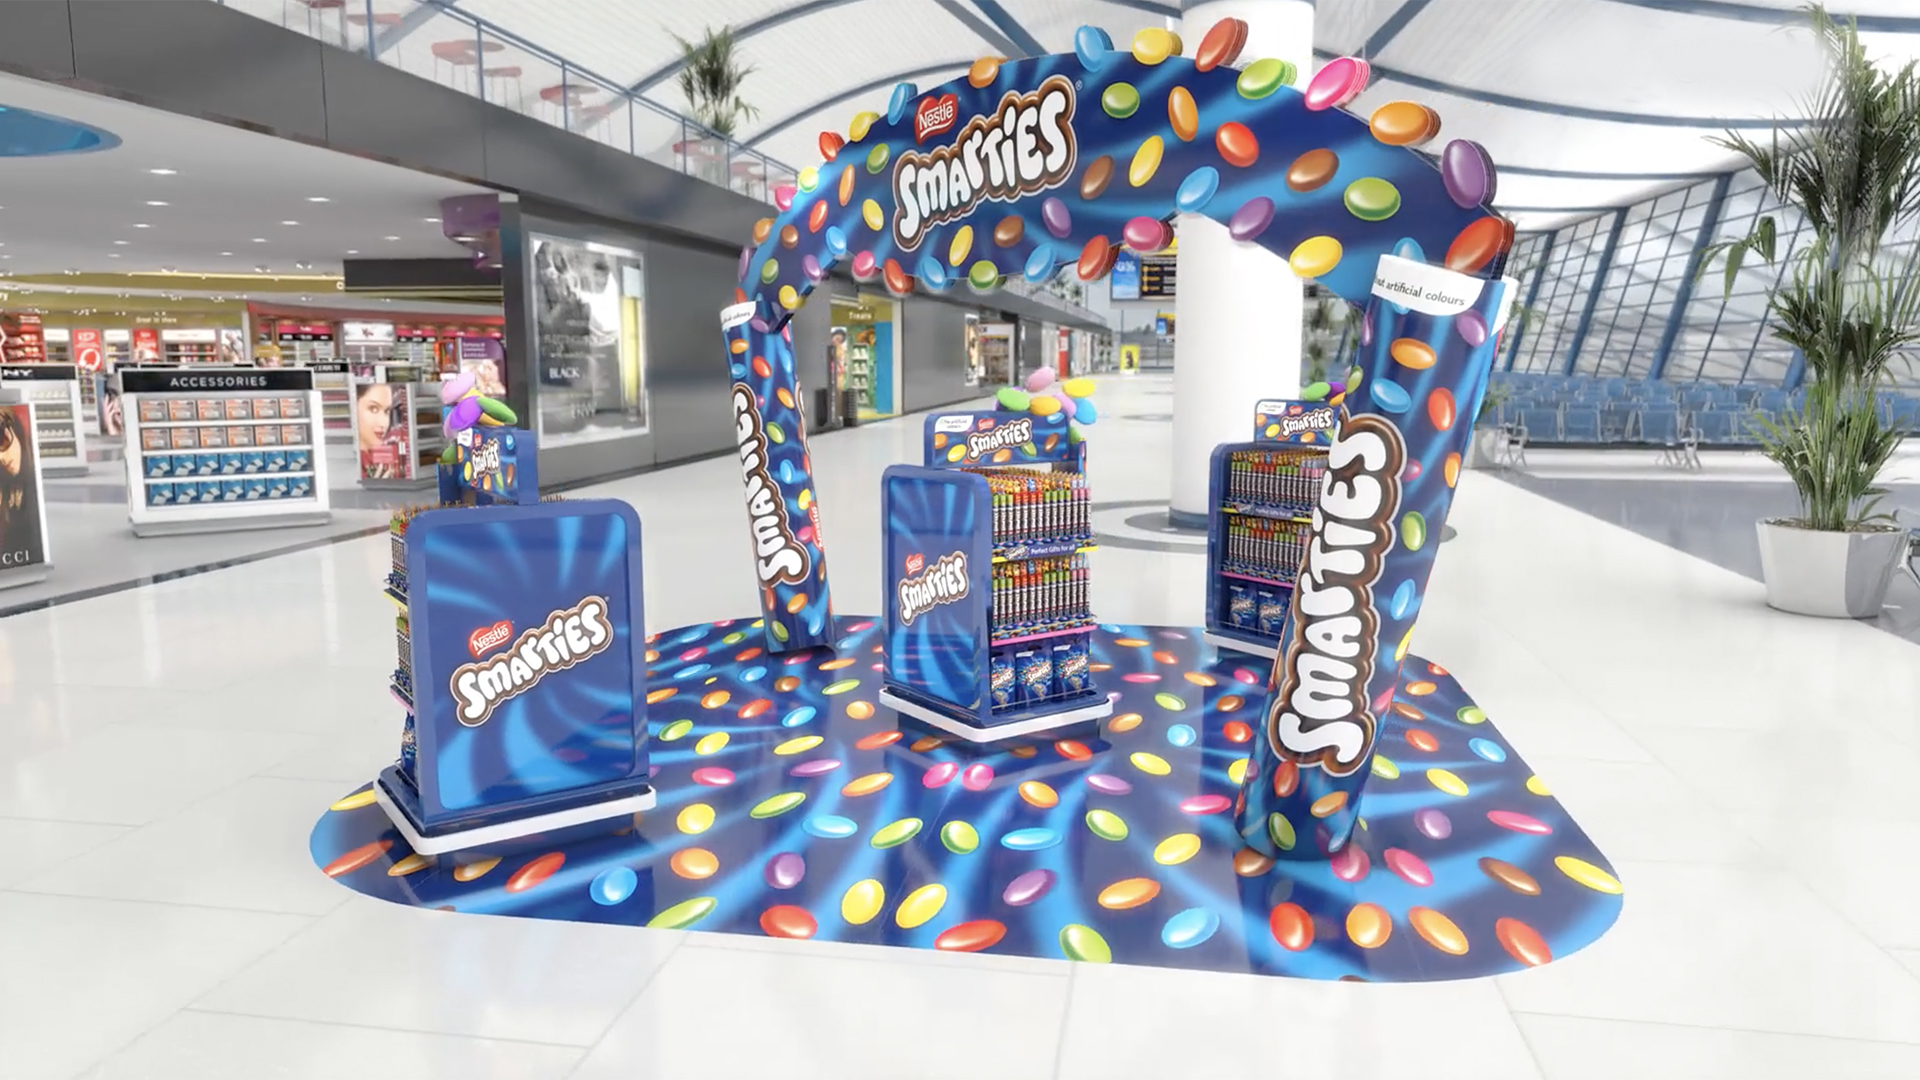 Retail activation design and visualisation